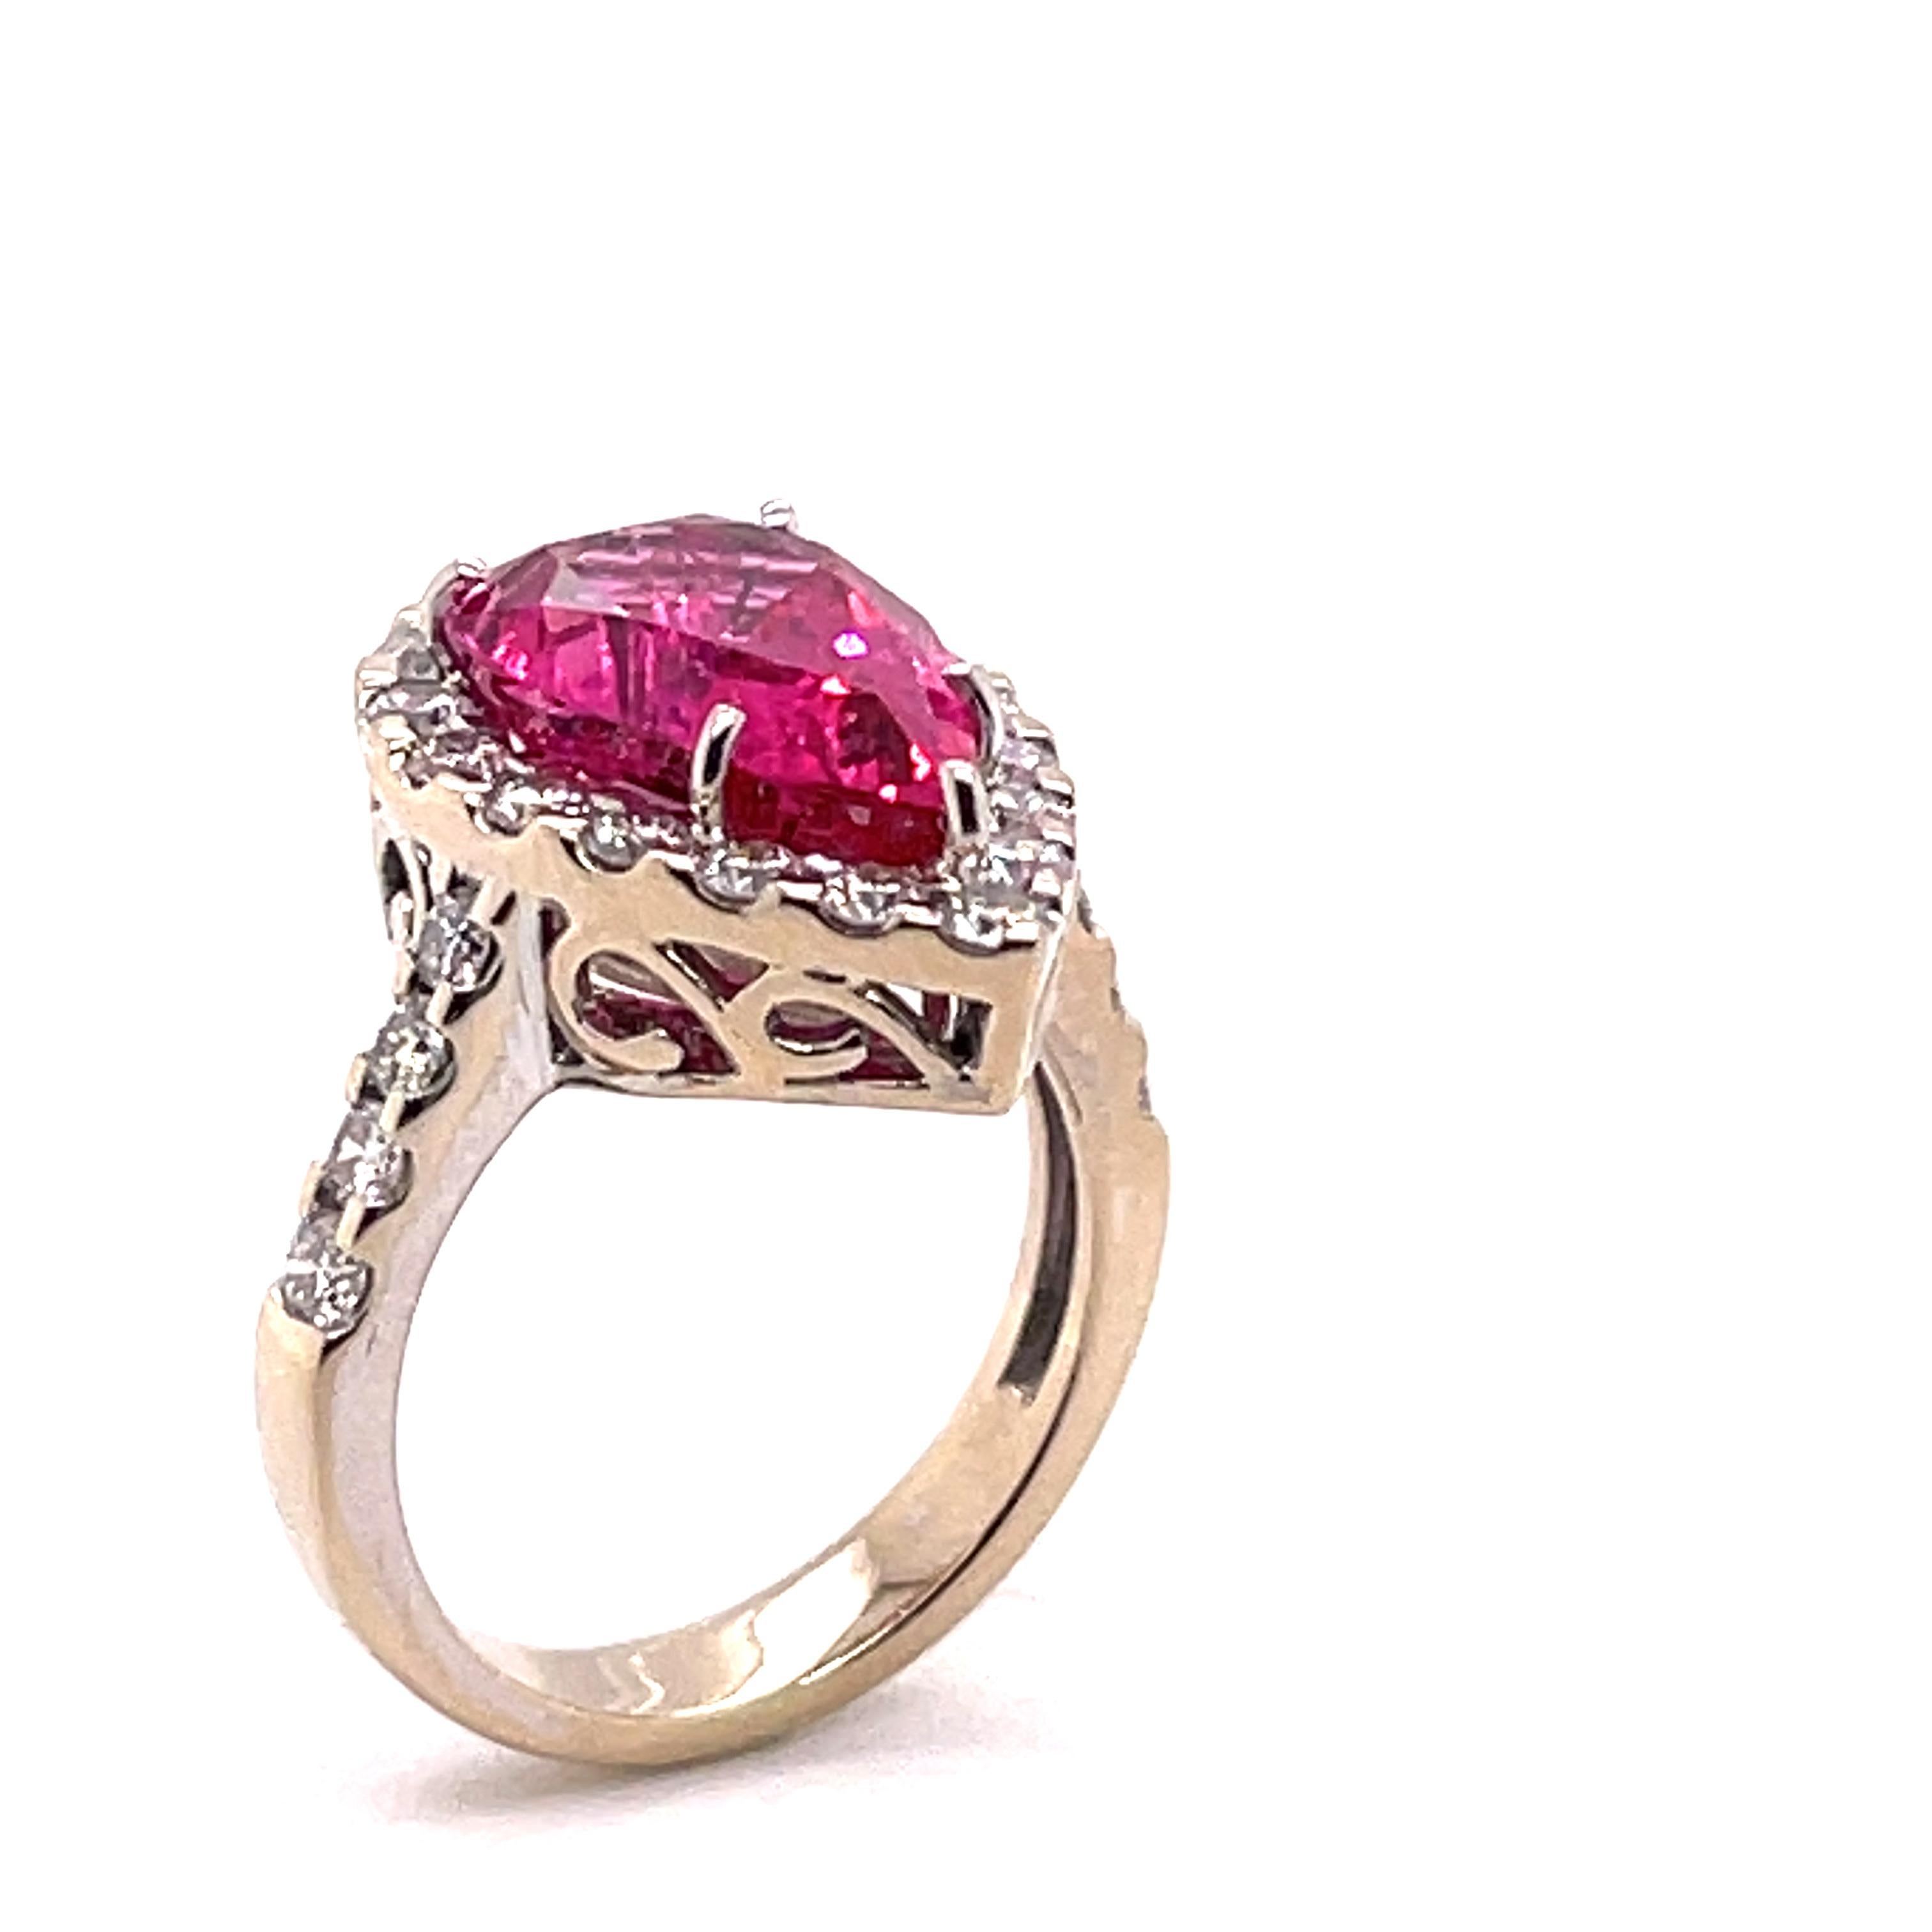 Pear Cut 5.95 Carat Pink Spinel Diamond Gold Ring For Sale